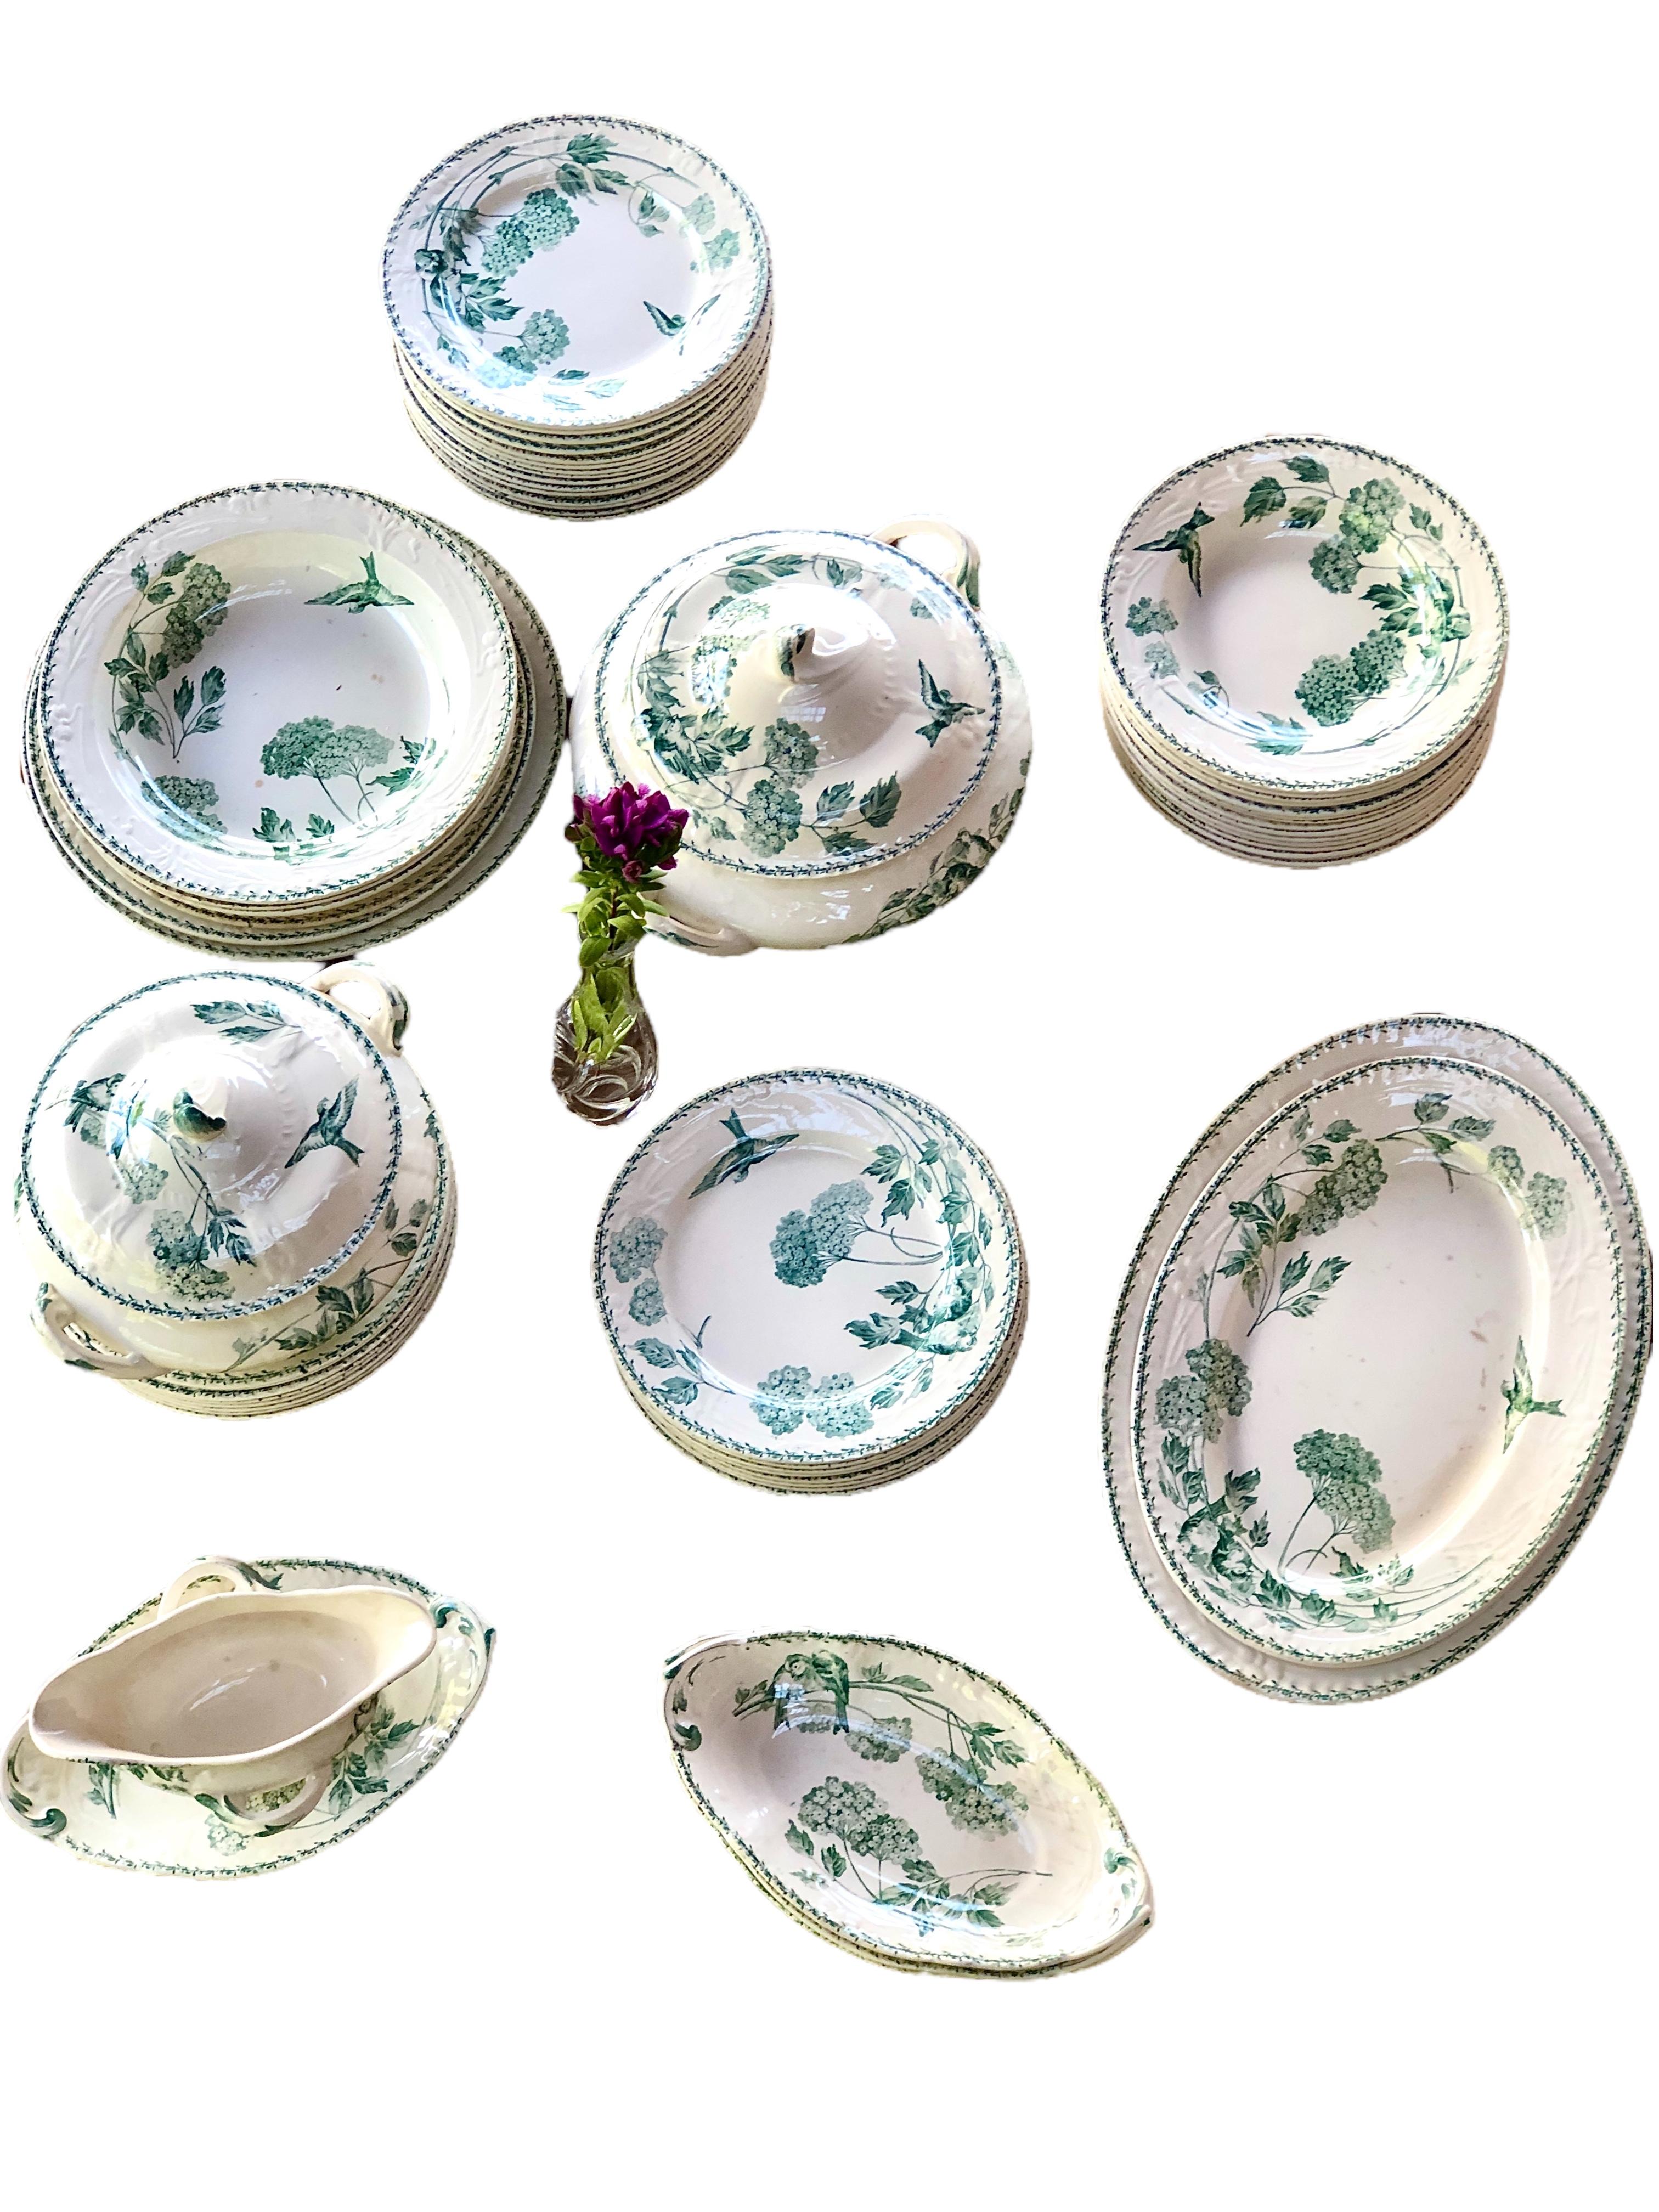 61 pieces of 19th-century Creil Montereau “Naples” French Faience Dinner Service, with serving pieces, in a white glaze with a simple green design of birds and flowers. In good antique condition with some marks and scratches from previous use.
30